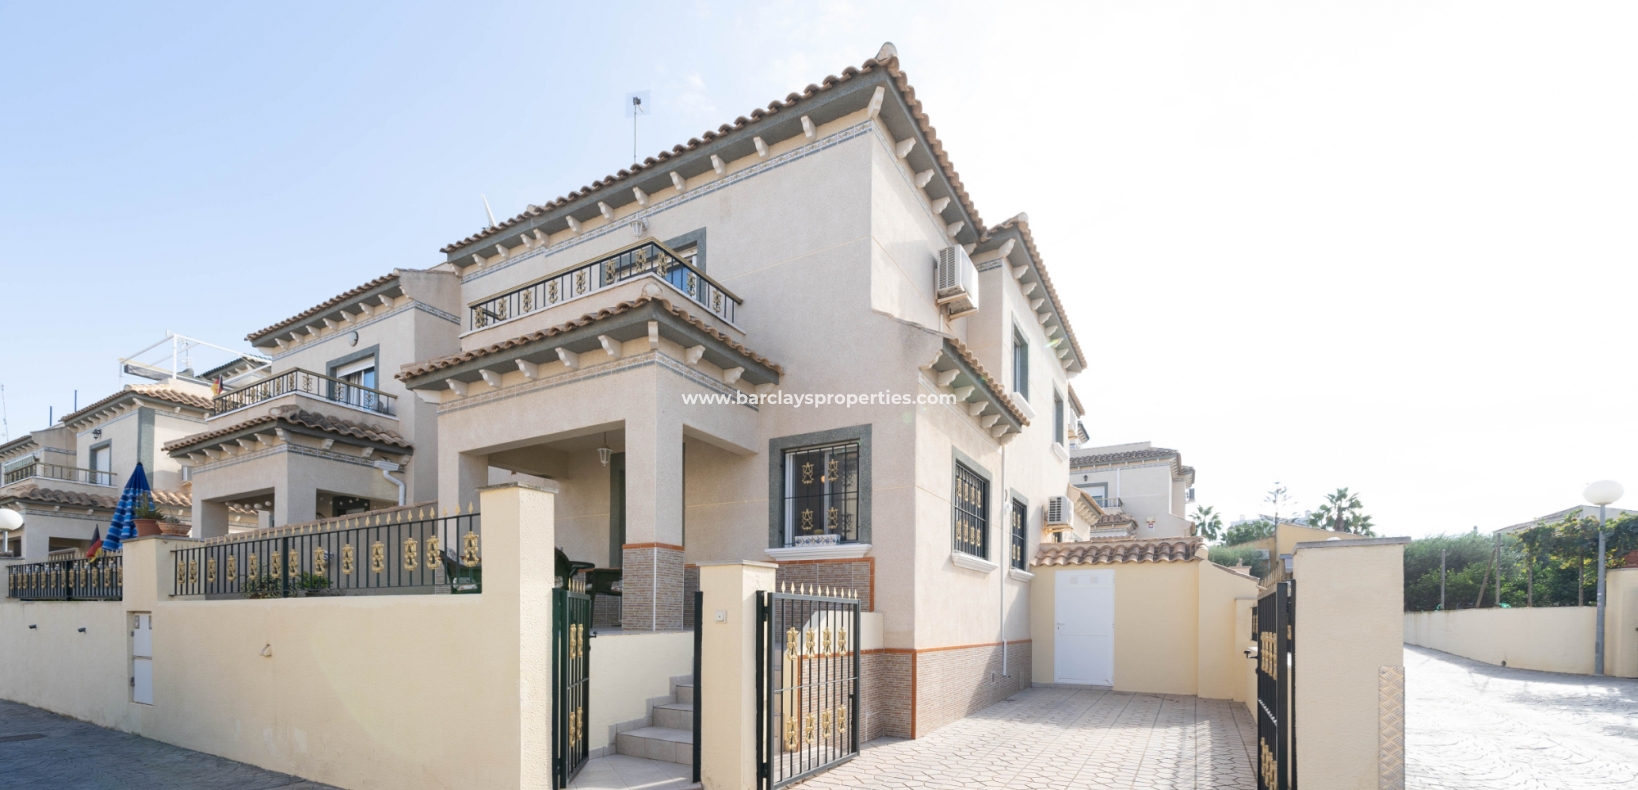 Houses for sale in Alicante